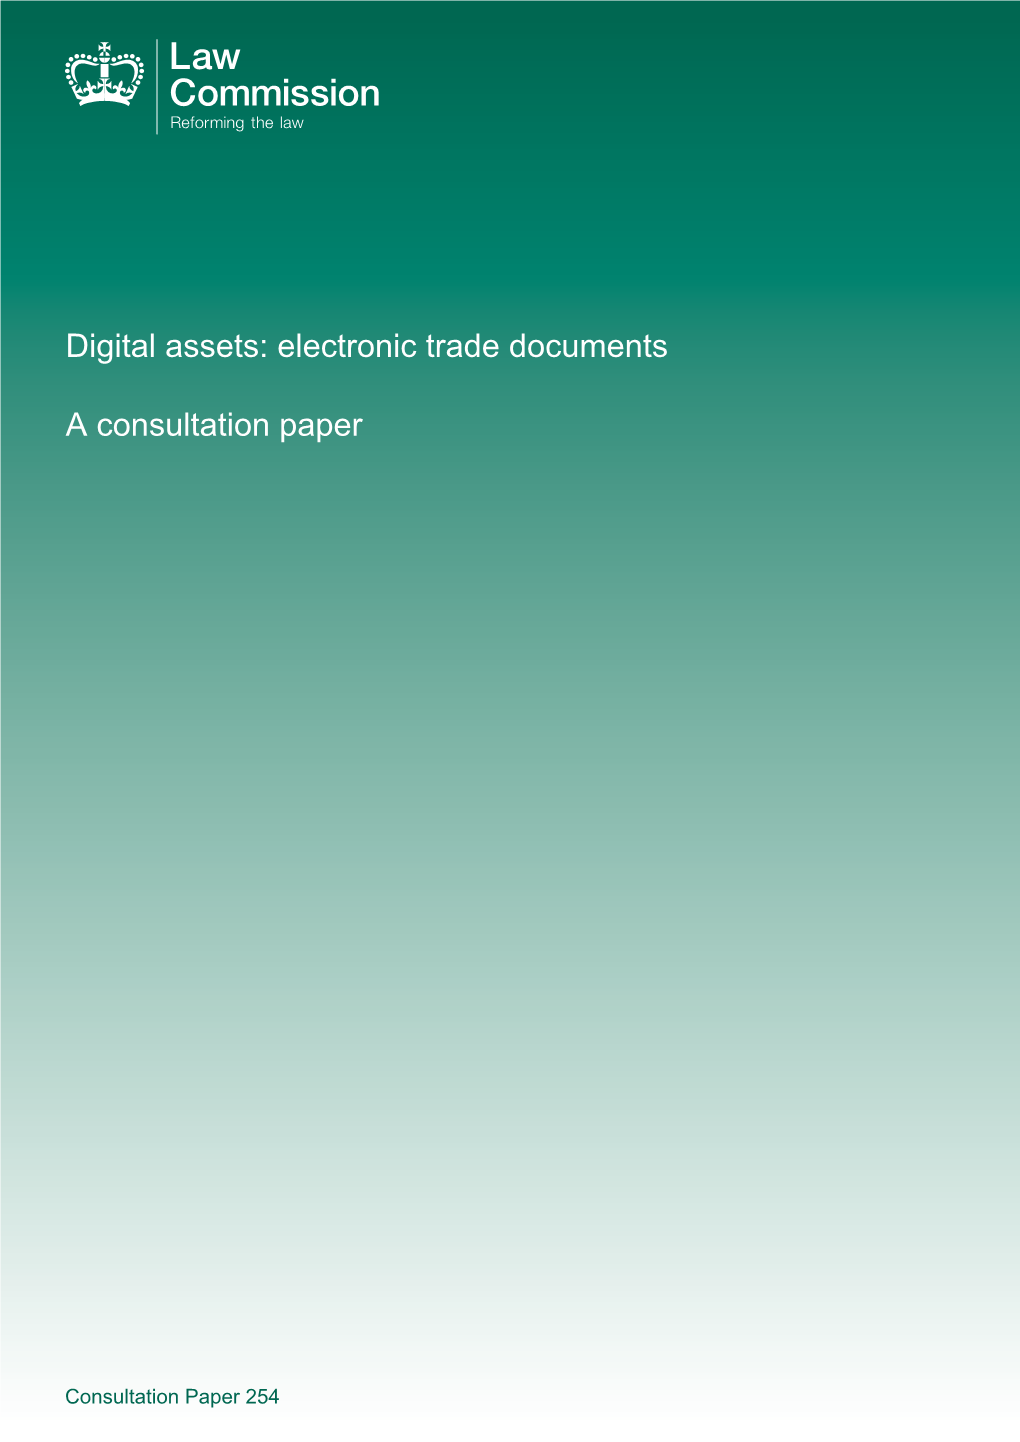 Digital Assets: Electronic Trade Documents a Consultation Paper